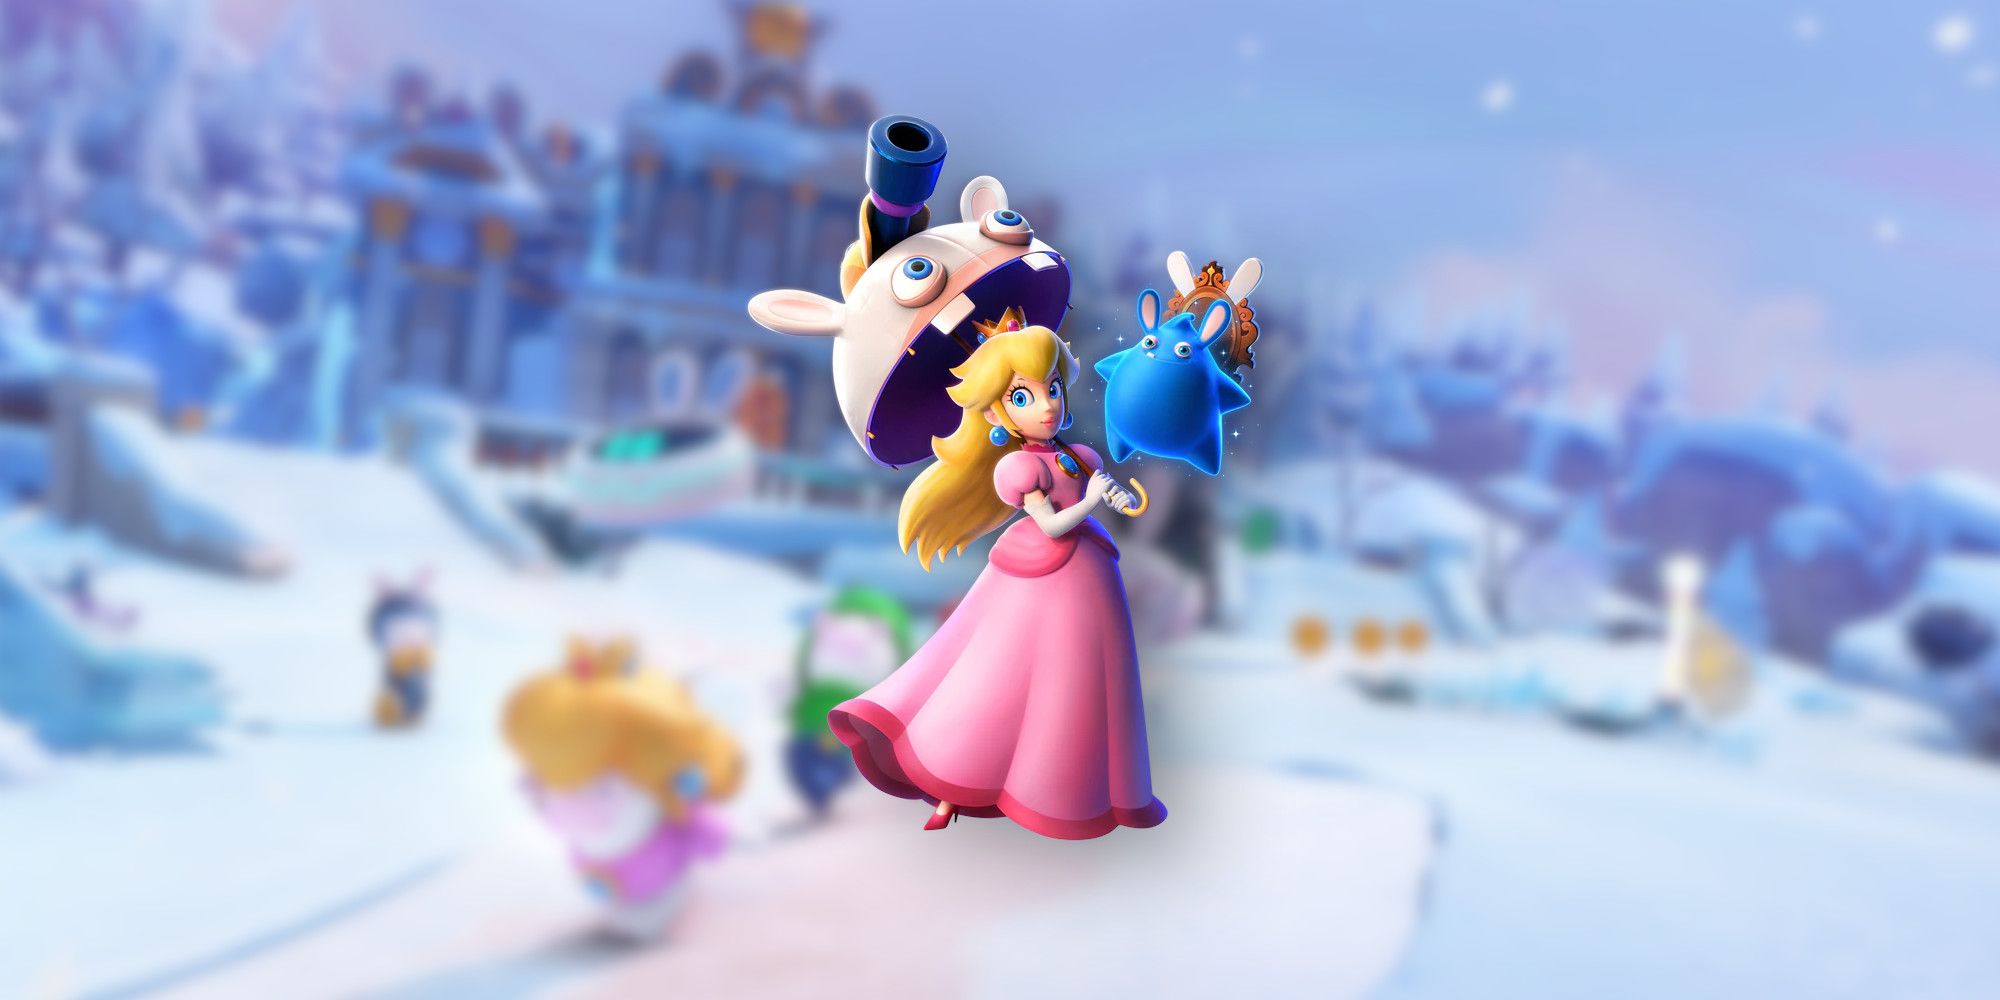 Peach in Mario Rabbids: Sparks of Hope